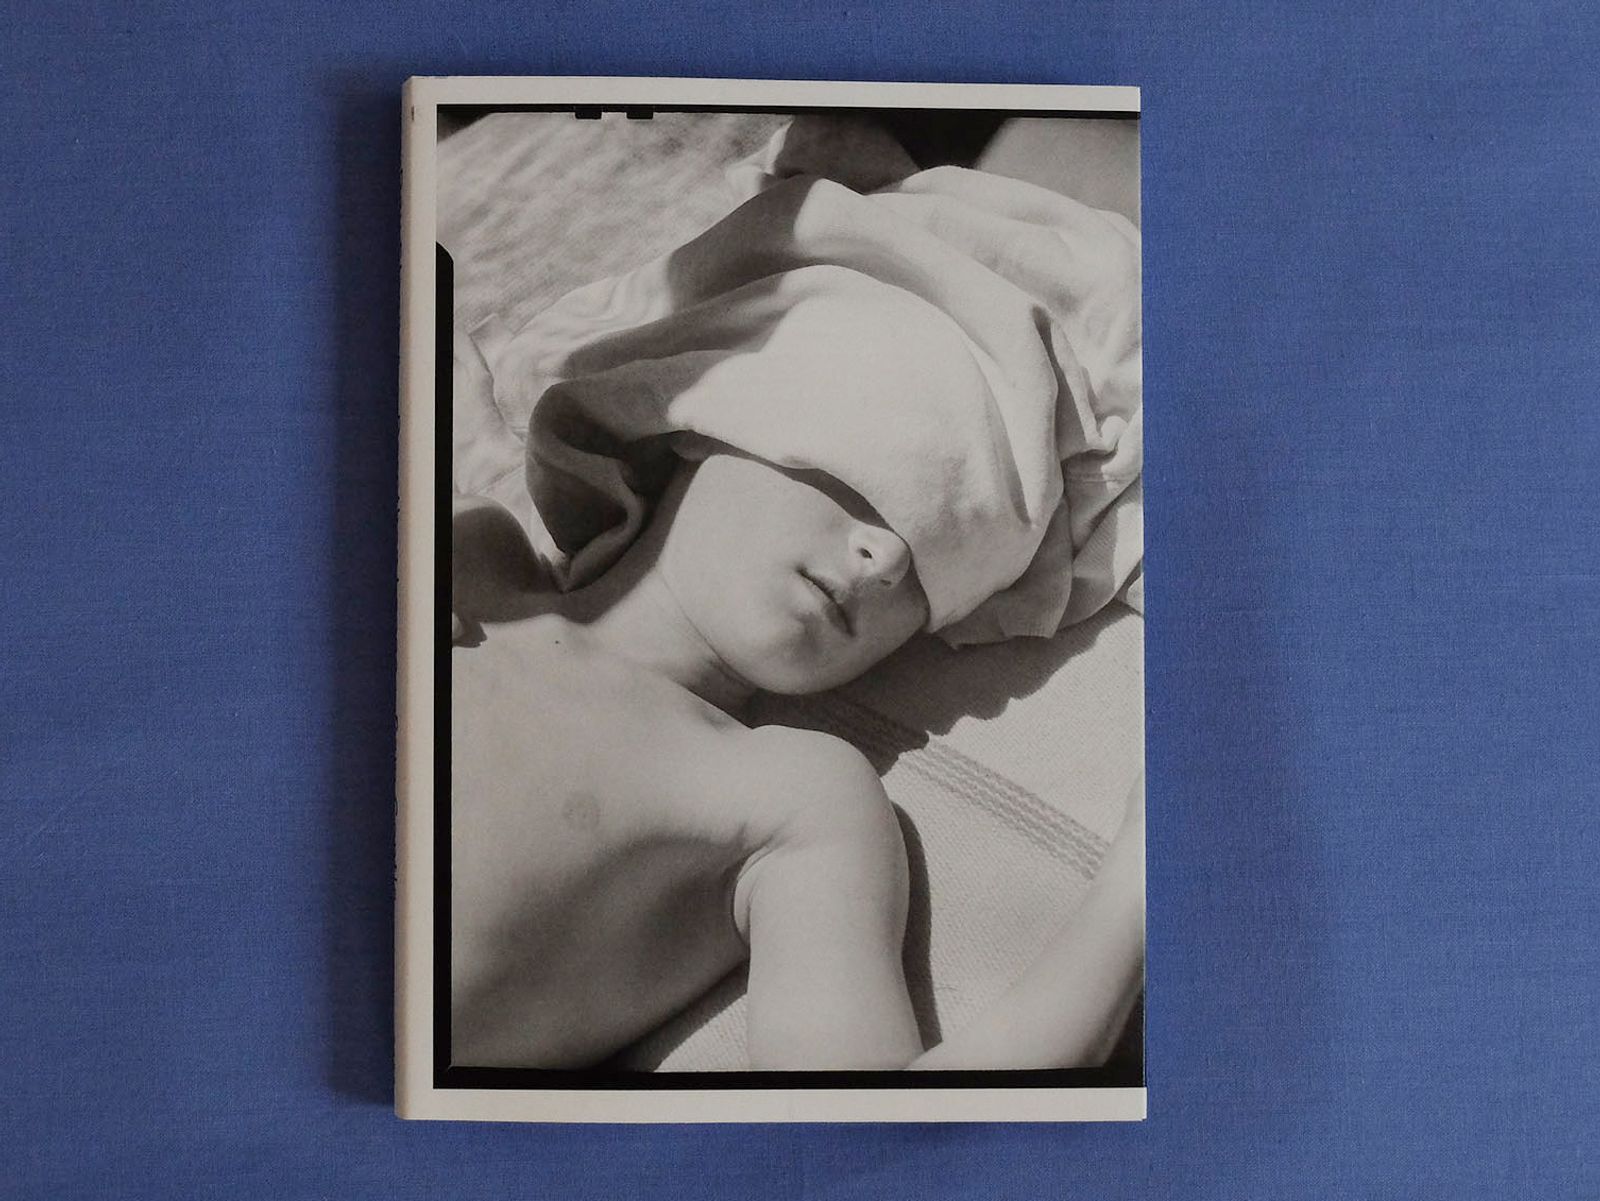 © Leporello Books - Image from the DAY SLEEPER by Sam Contis, Dorethea Lange photography project